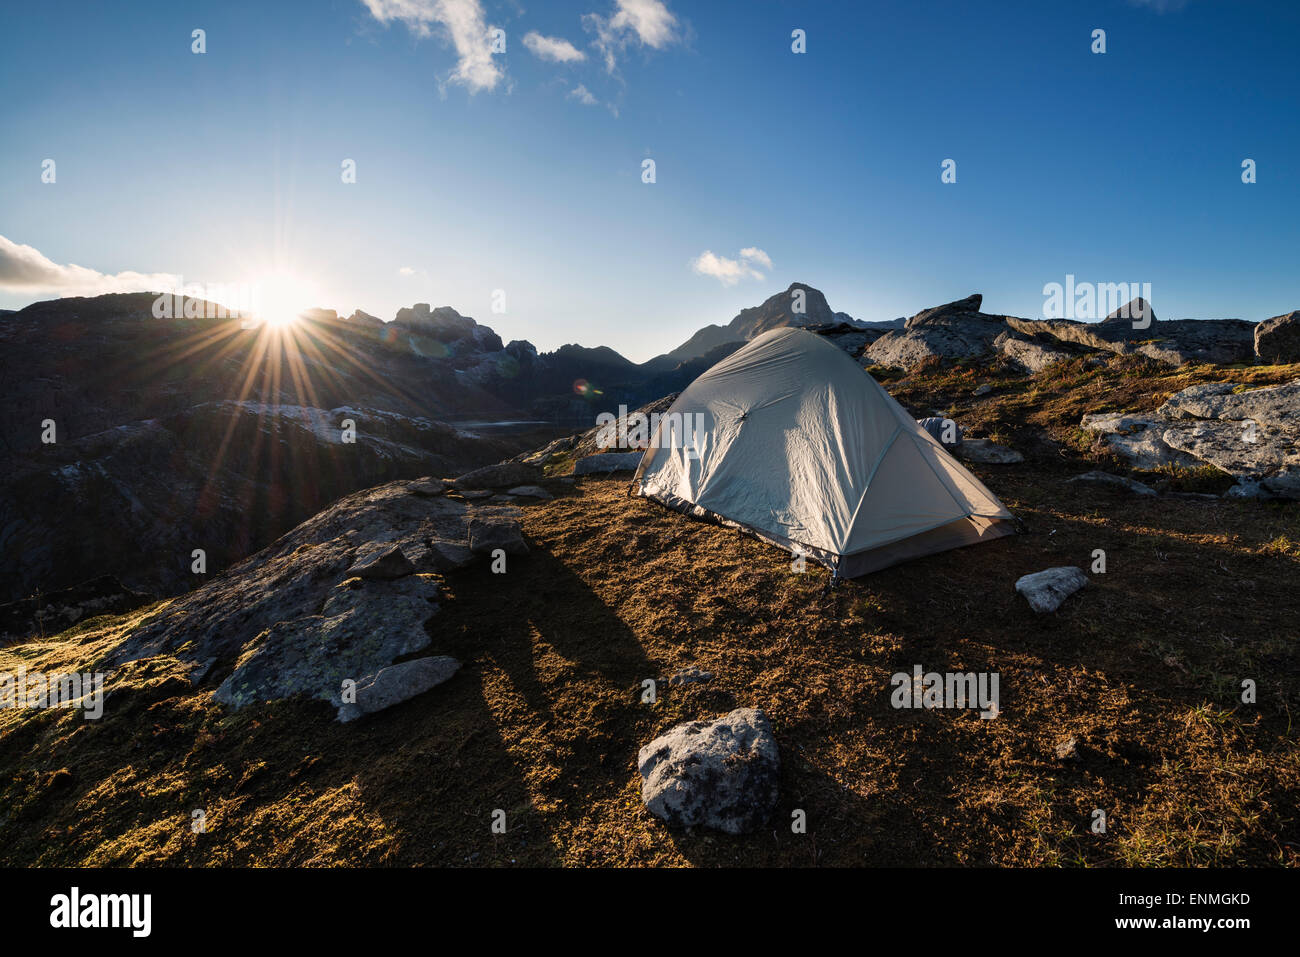 Tent and setting sun in mountain campsite, Moskenesøy, Lofoten Islands, Norway Stock Photo